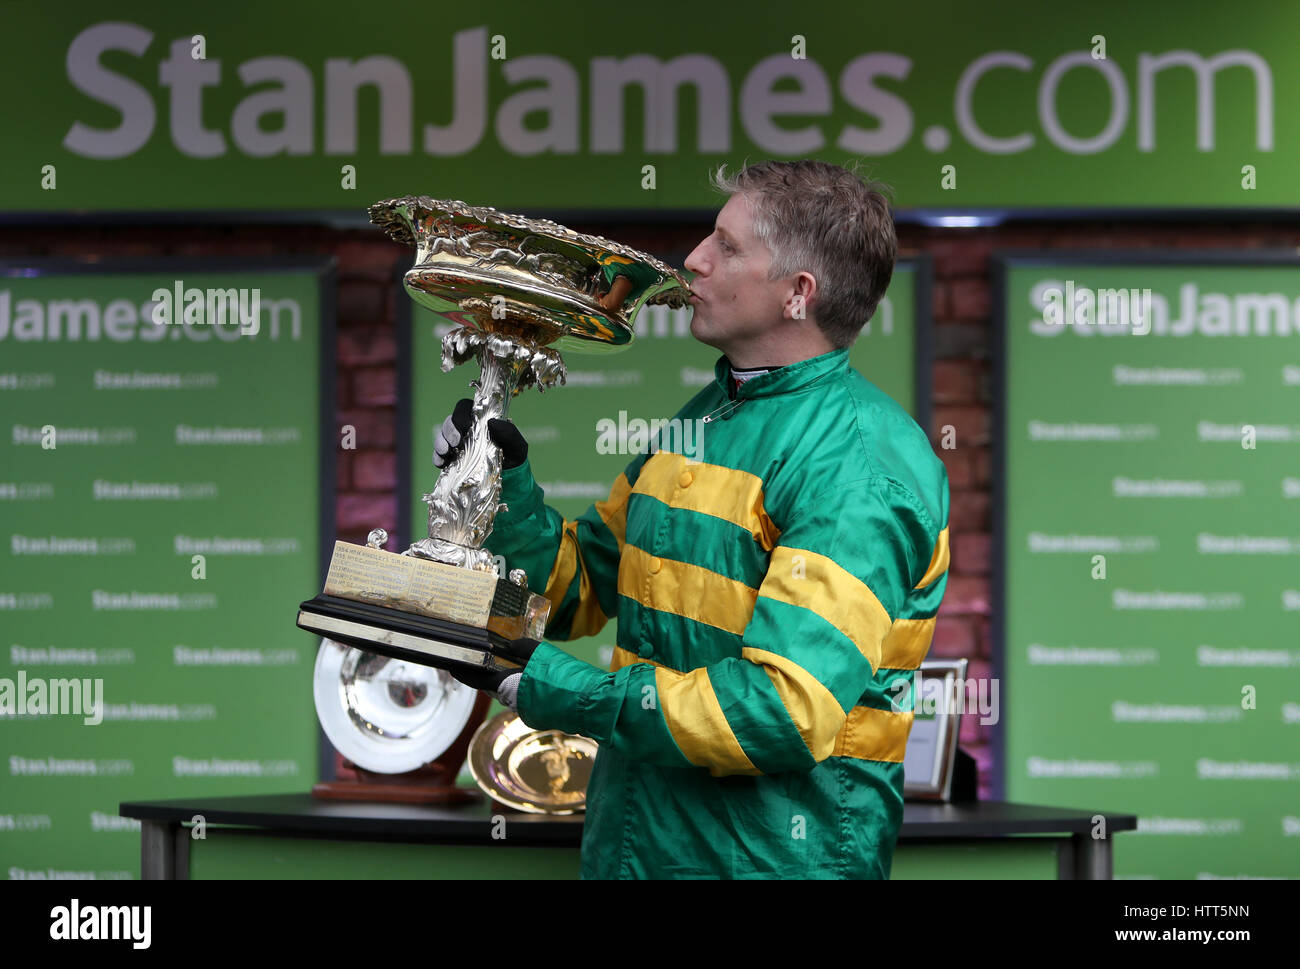 Jockey Noel Fehily with the Stan James Champion Hurdle Challenge Trophy during Champion Day of the 2017 Cheltenham Festival at Cheltenham Racecourse. PRESS ASSOCIATION Photo. Picture date: Tuesday March 14, 2017. See PA story RACING Cheltenham. Photo credit should read: David Davies/PA Wire. RESTRICTIONS: Editorial Use only, commercial use is subject to prior permission from The Jockey Club/Cheltenham Racecourse Stock Photo